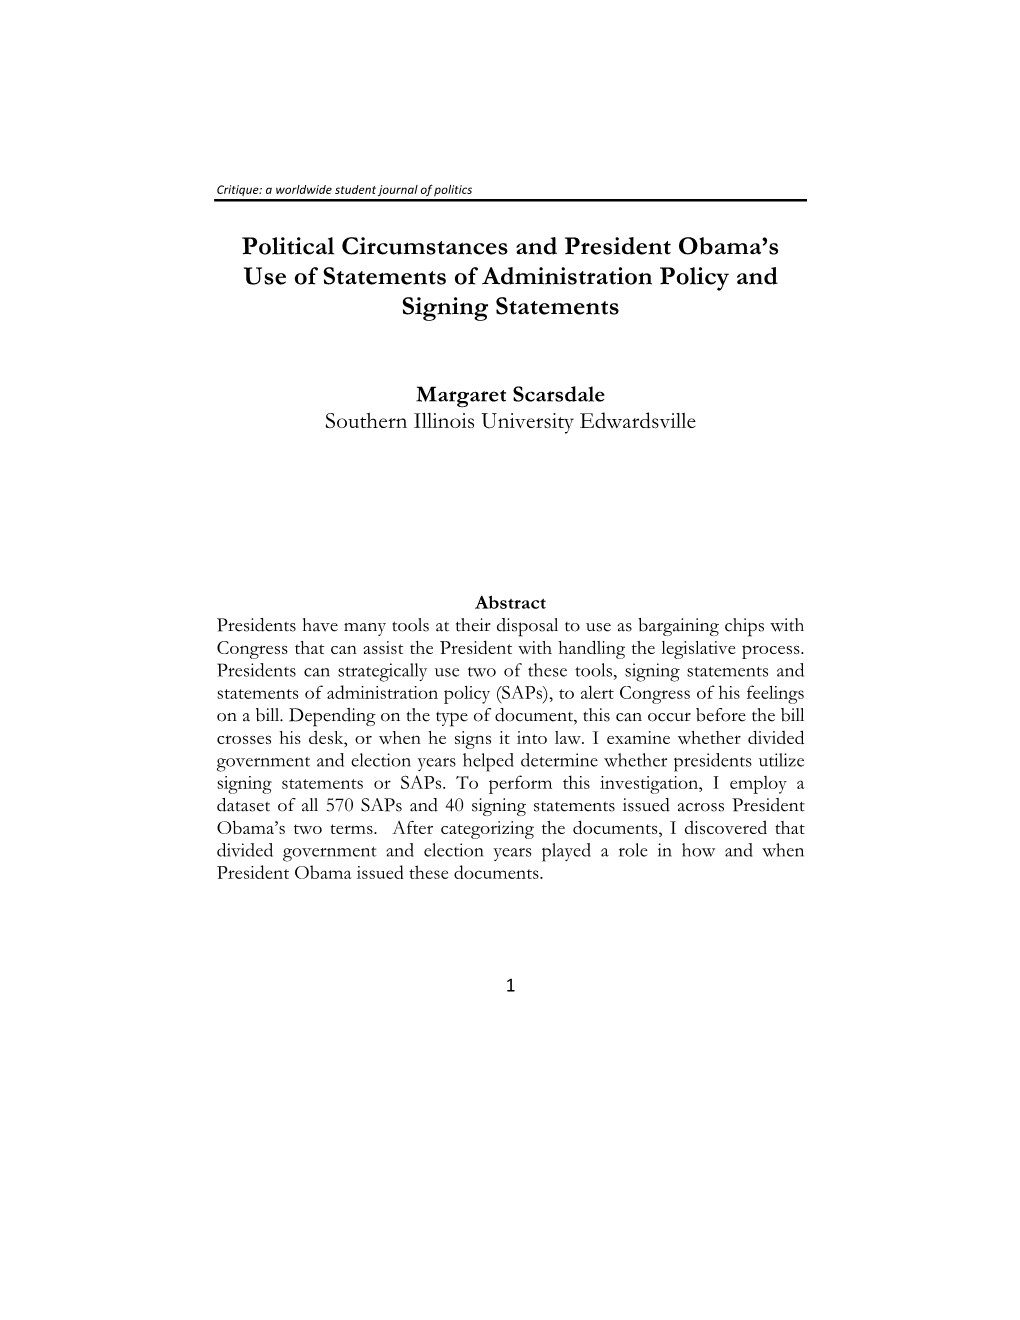 Political Circumstances and President Obama's Use of Statements Of